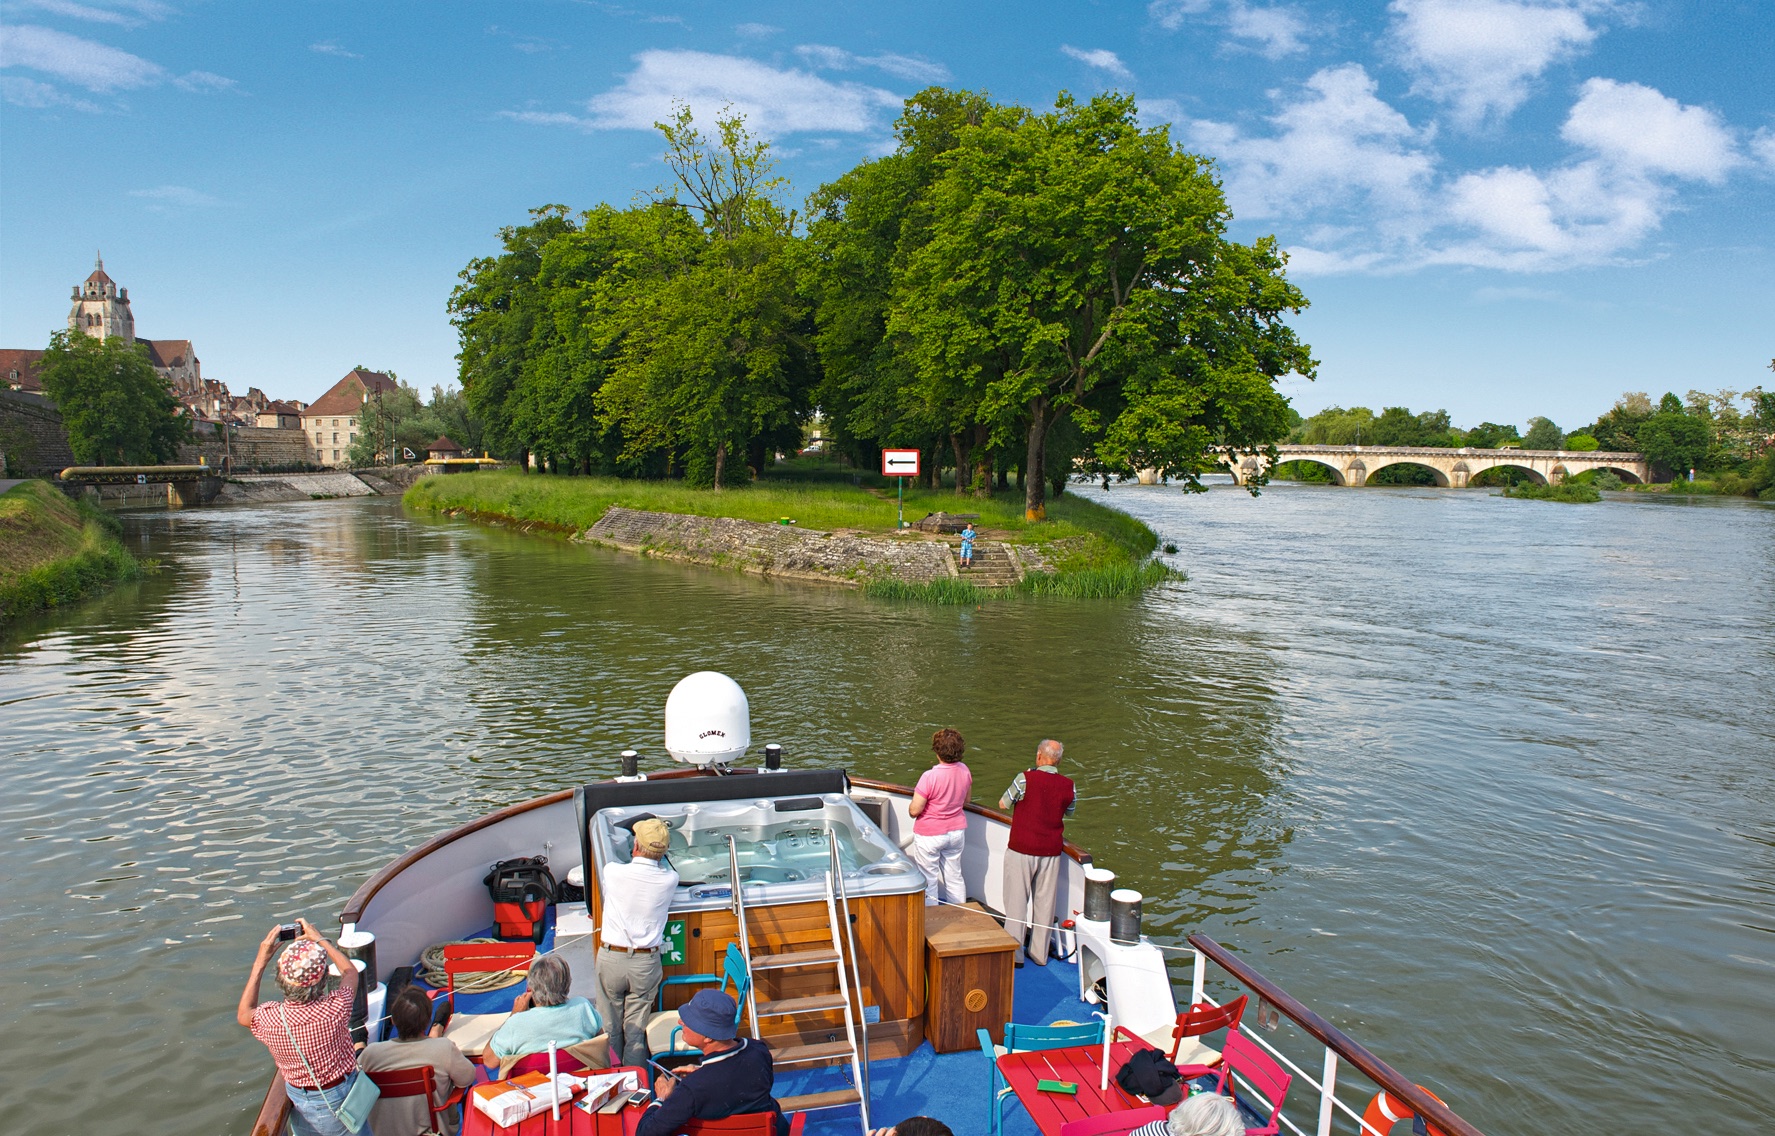 Intimate and local. The best way to discover the real France is by luxury canal barge.